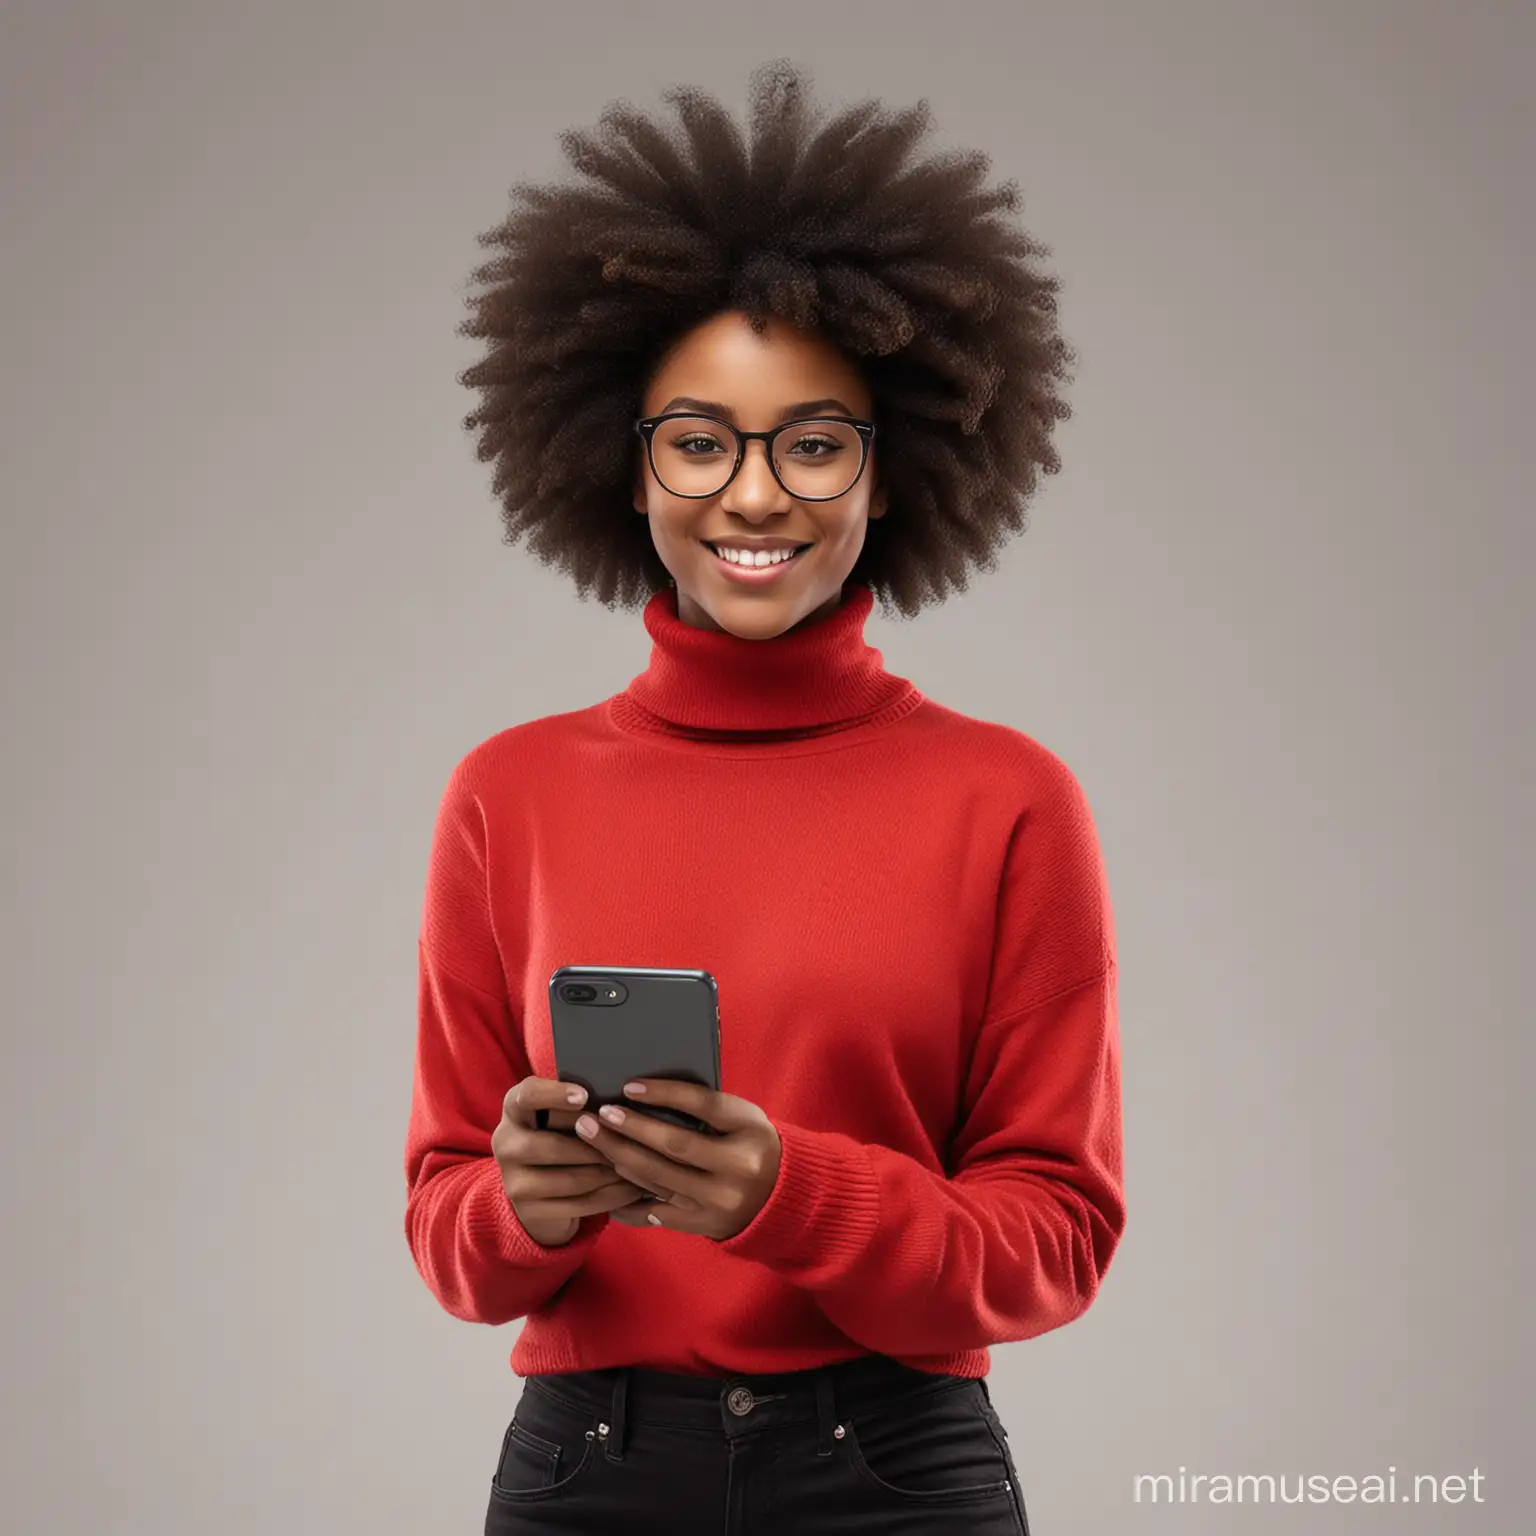 Stylish African American Woman in Red Sweater Using Smartphone